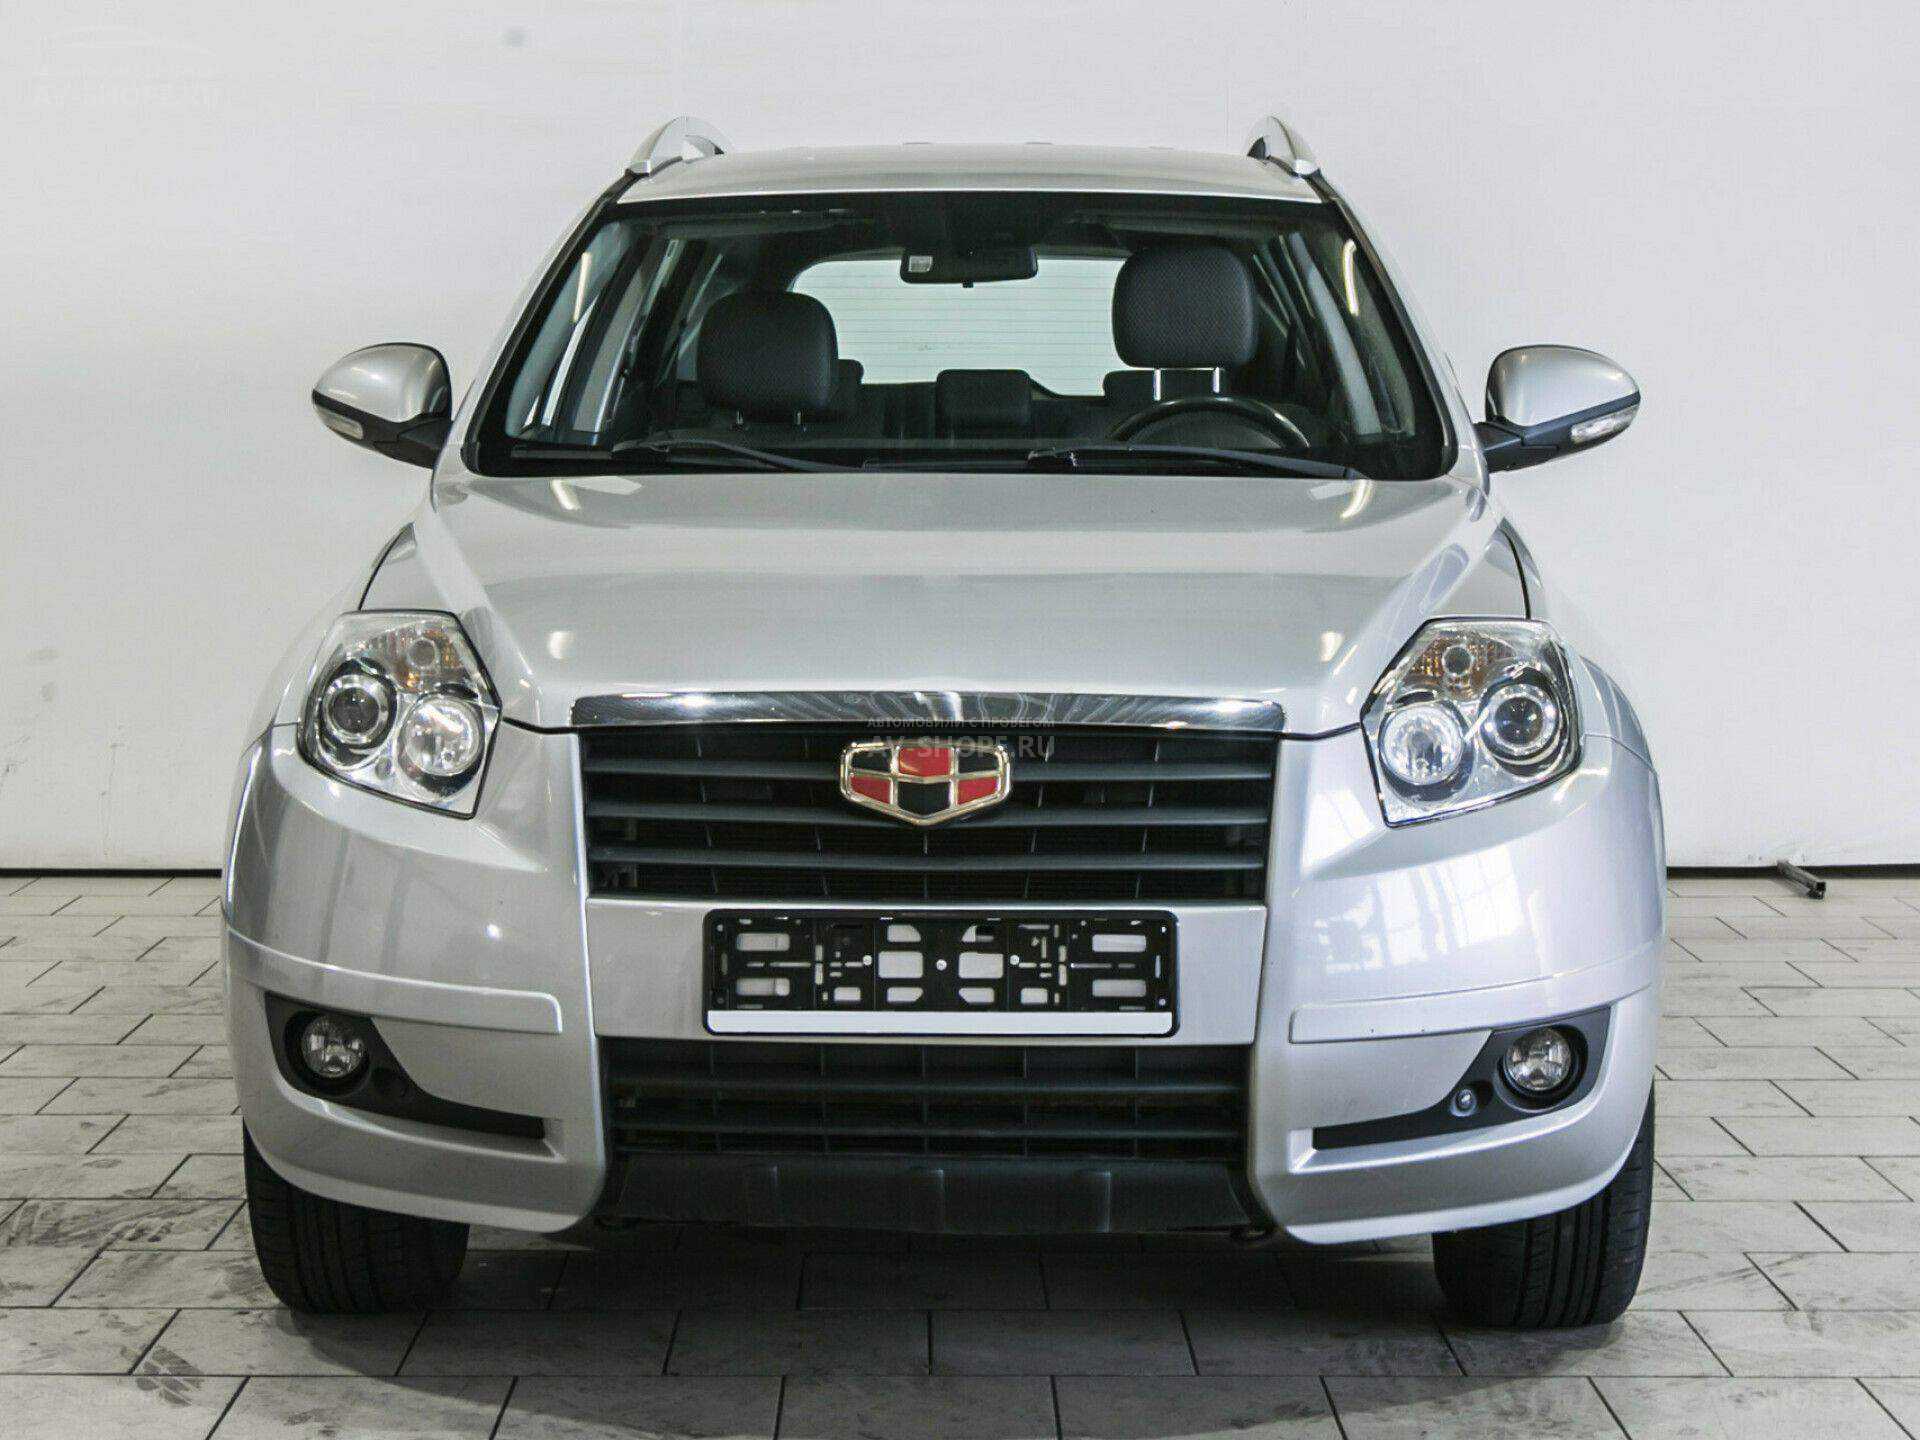 Geely emgrand x7 2015. Geely Emgrand x7. Автомобиль Geely Emgrand x7, 2015 г.в.. Geely Emgrand x7,1016013507.